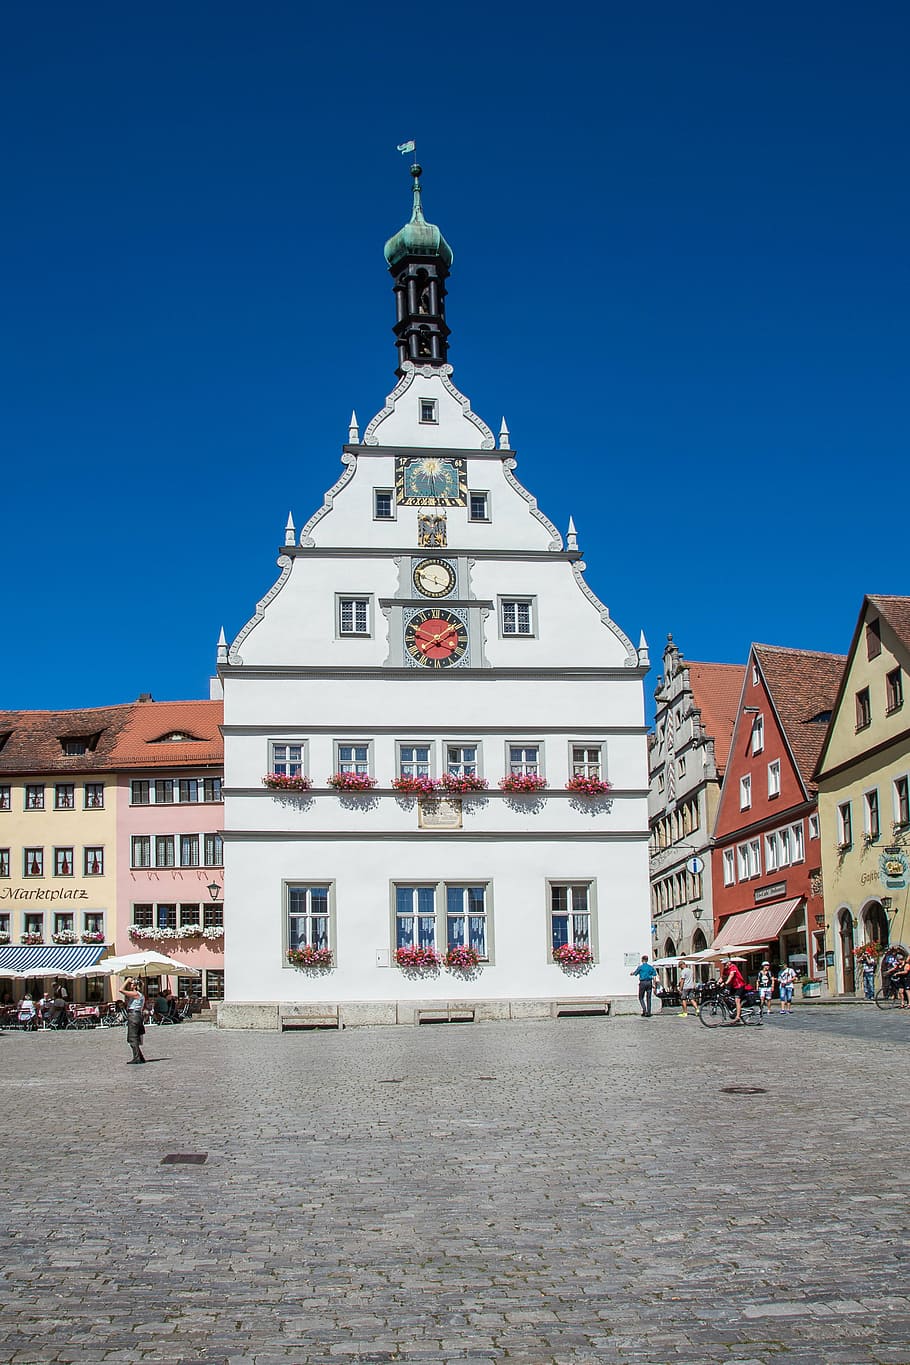 rothenburg of the deaf, marketplace, ratstrinkstube, places of interest, architecture, built structure, building exterior, building, sky, clear sky